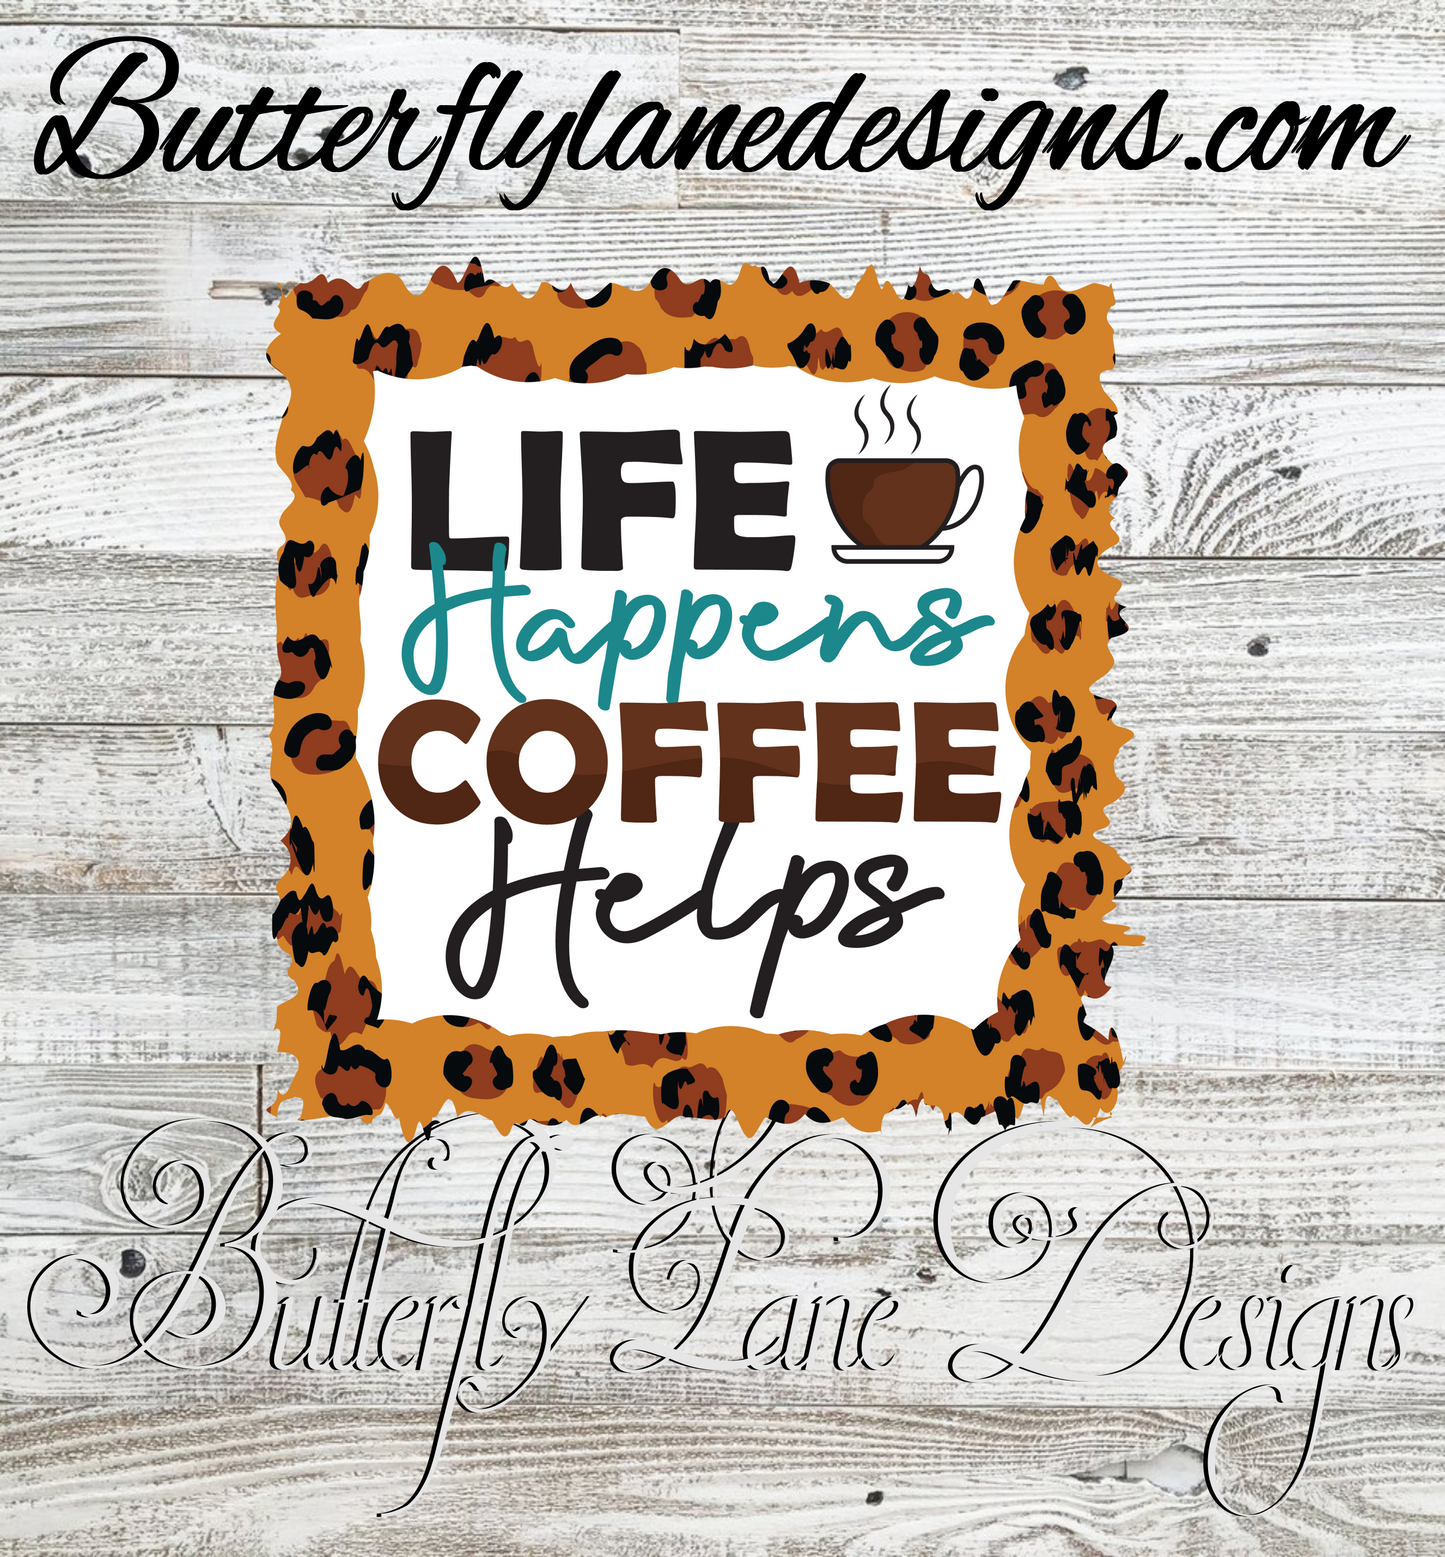 Life happens coffee helps :: Clear Cast Decal